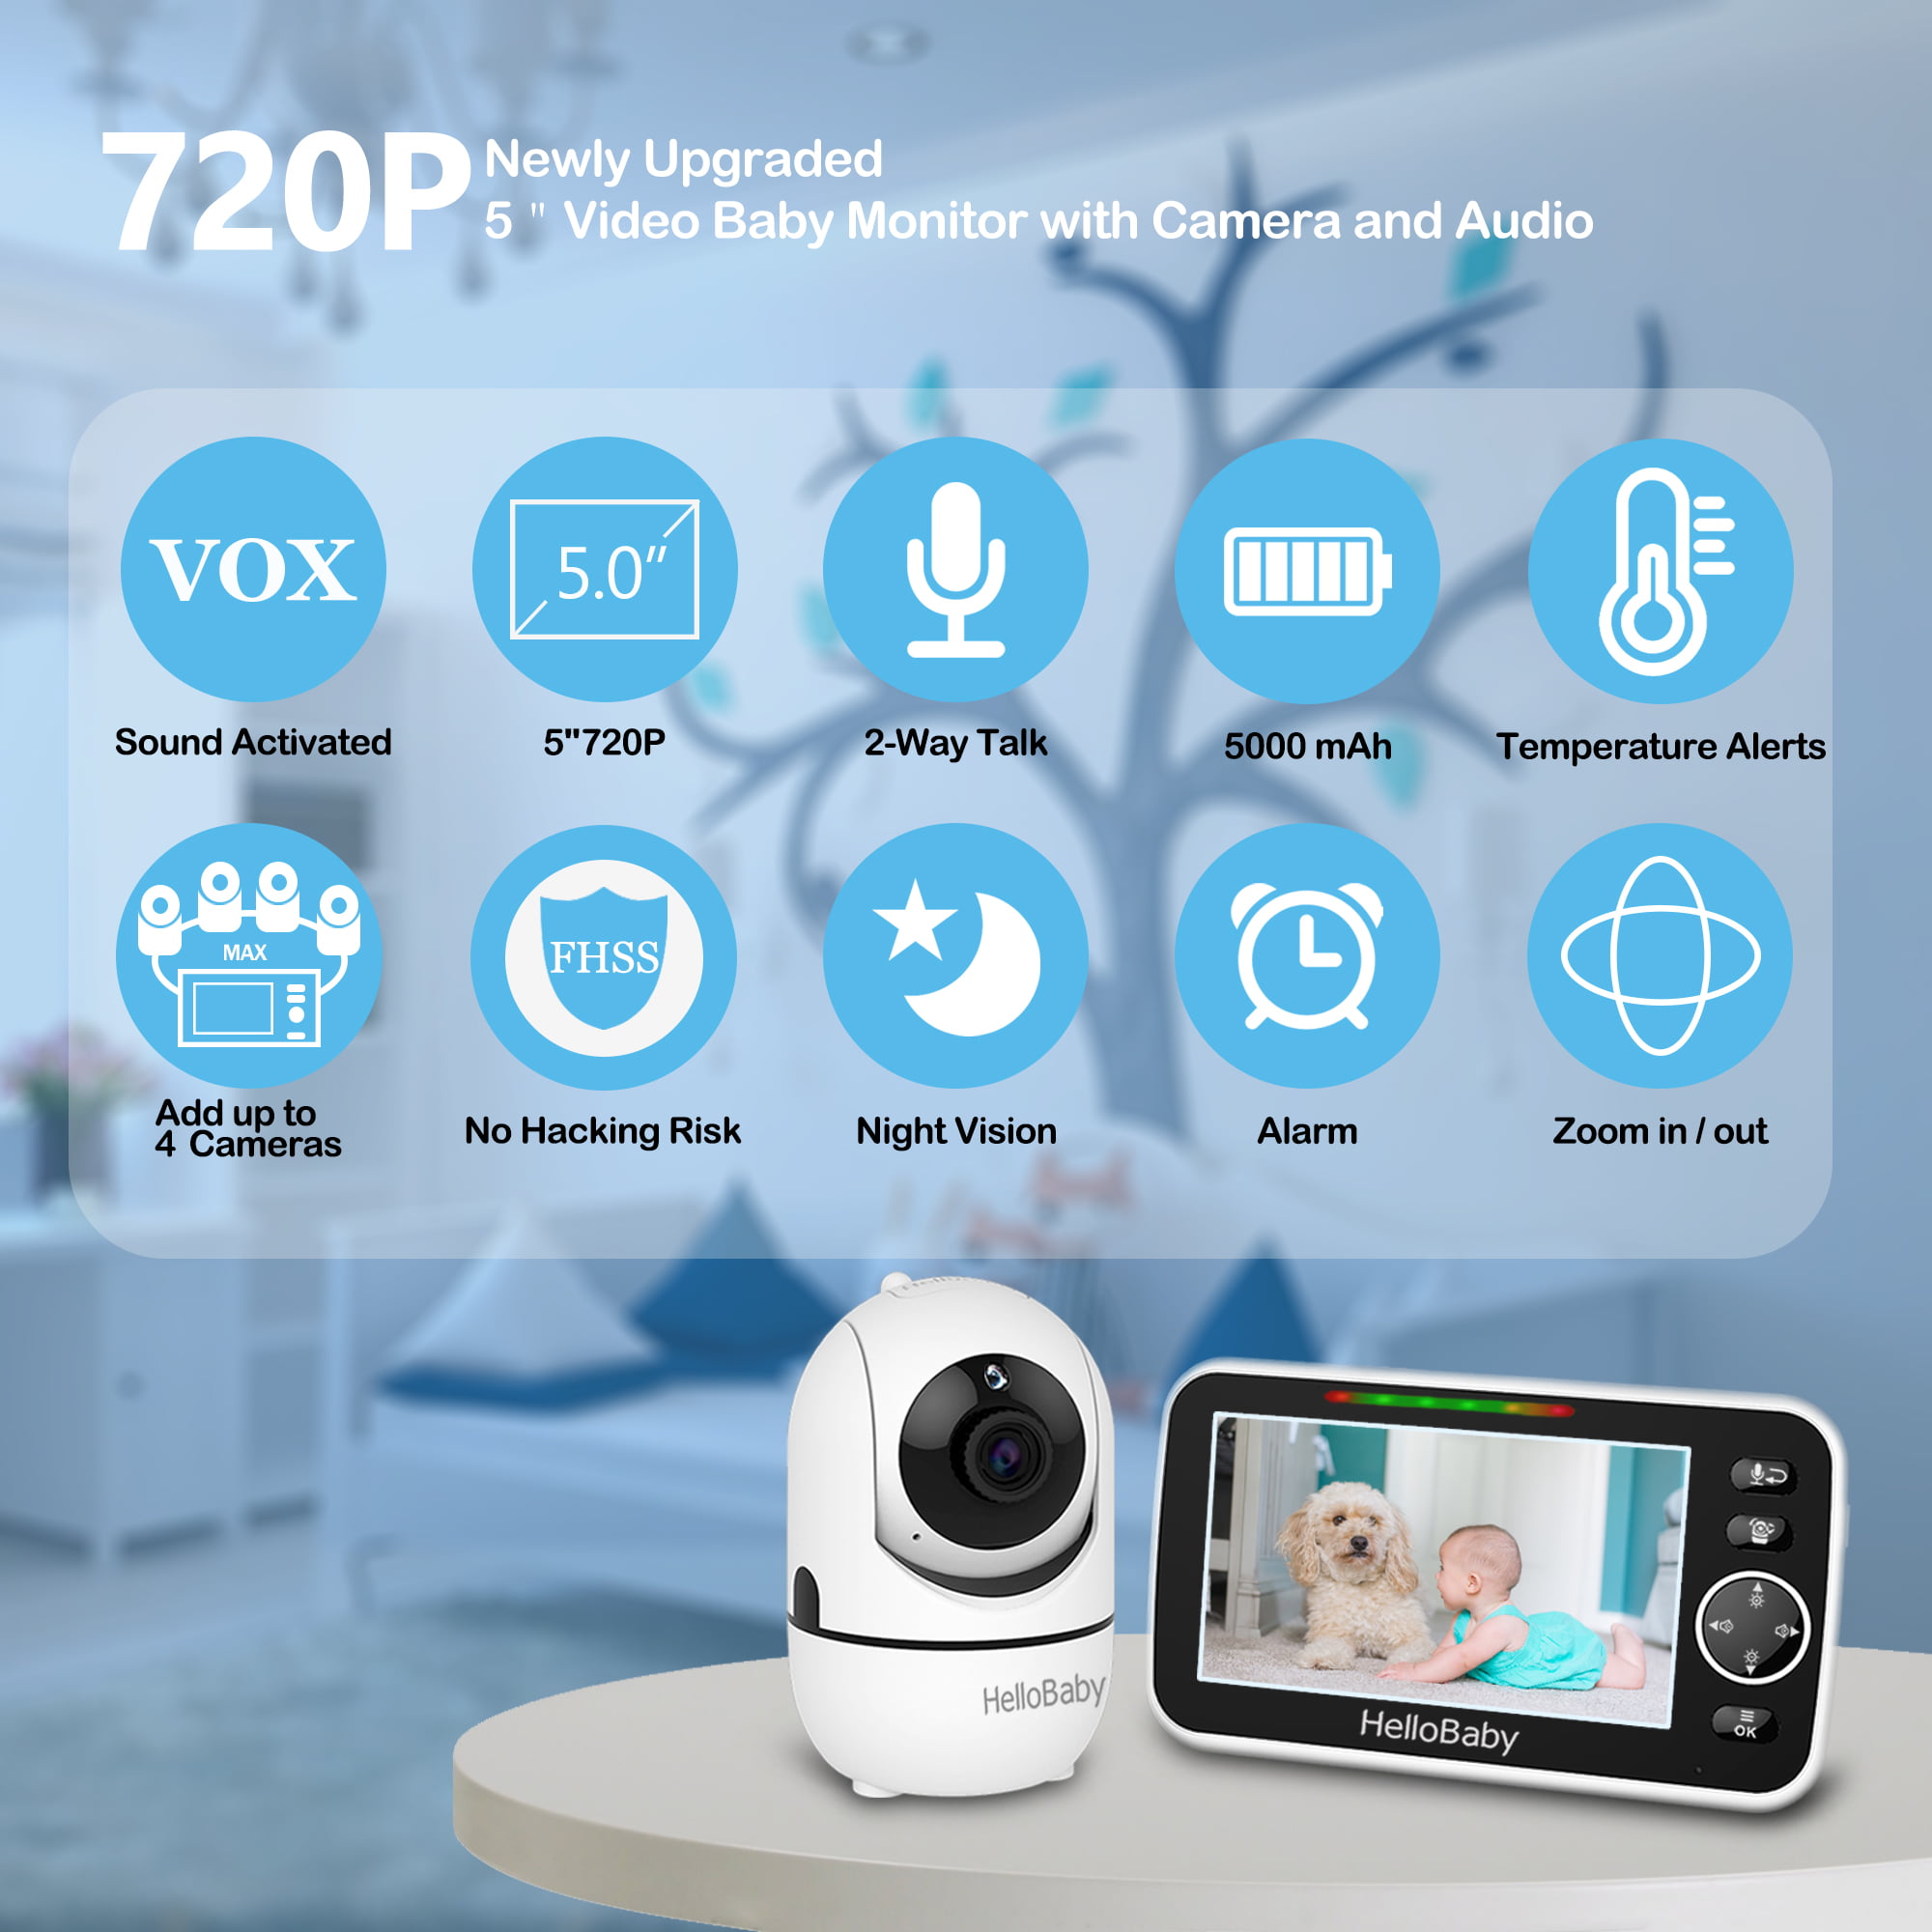  HelloBaby HB6588 Extra Camera, Only for HB6588 - Baby Unit  Add-on Camera for HB6588, Only Work with HB6588 720P Video Baby Monitor,  NOT Compatible with HB6550, HB65, HB50 : Baby